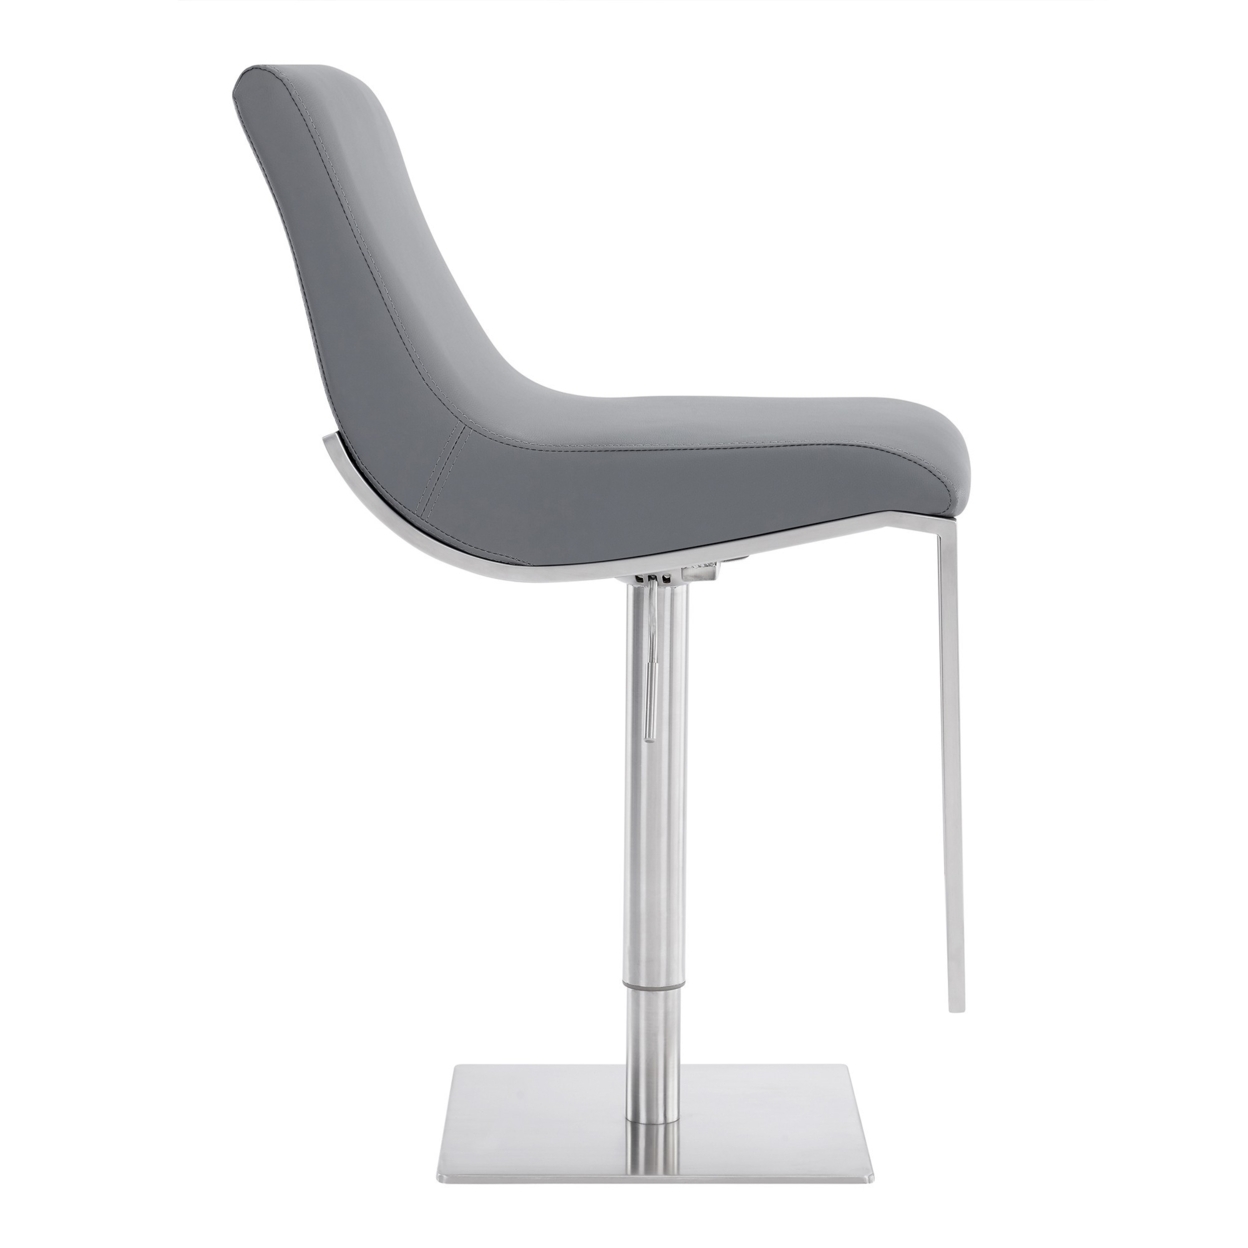 Curved Leatherette Barstool With Adjustable Height, Gray- Saltoro Sherpi